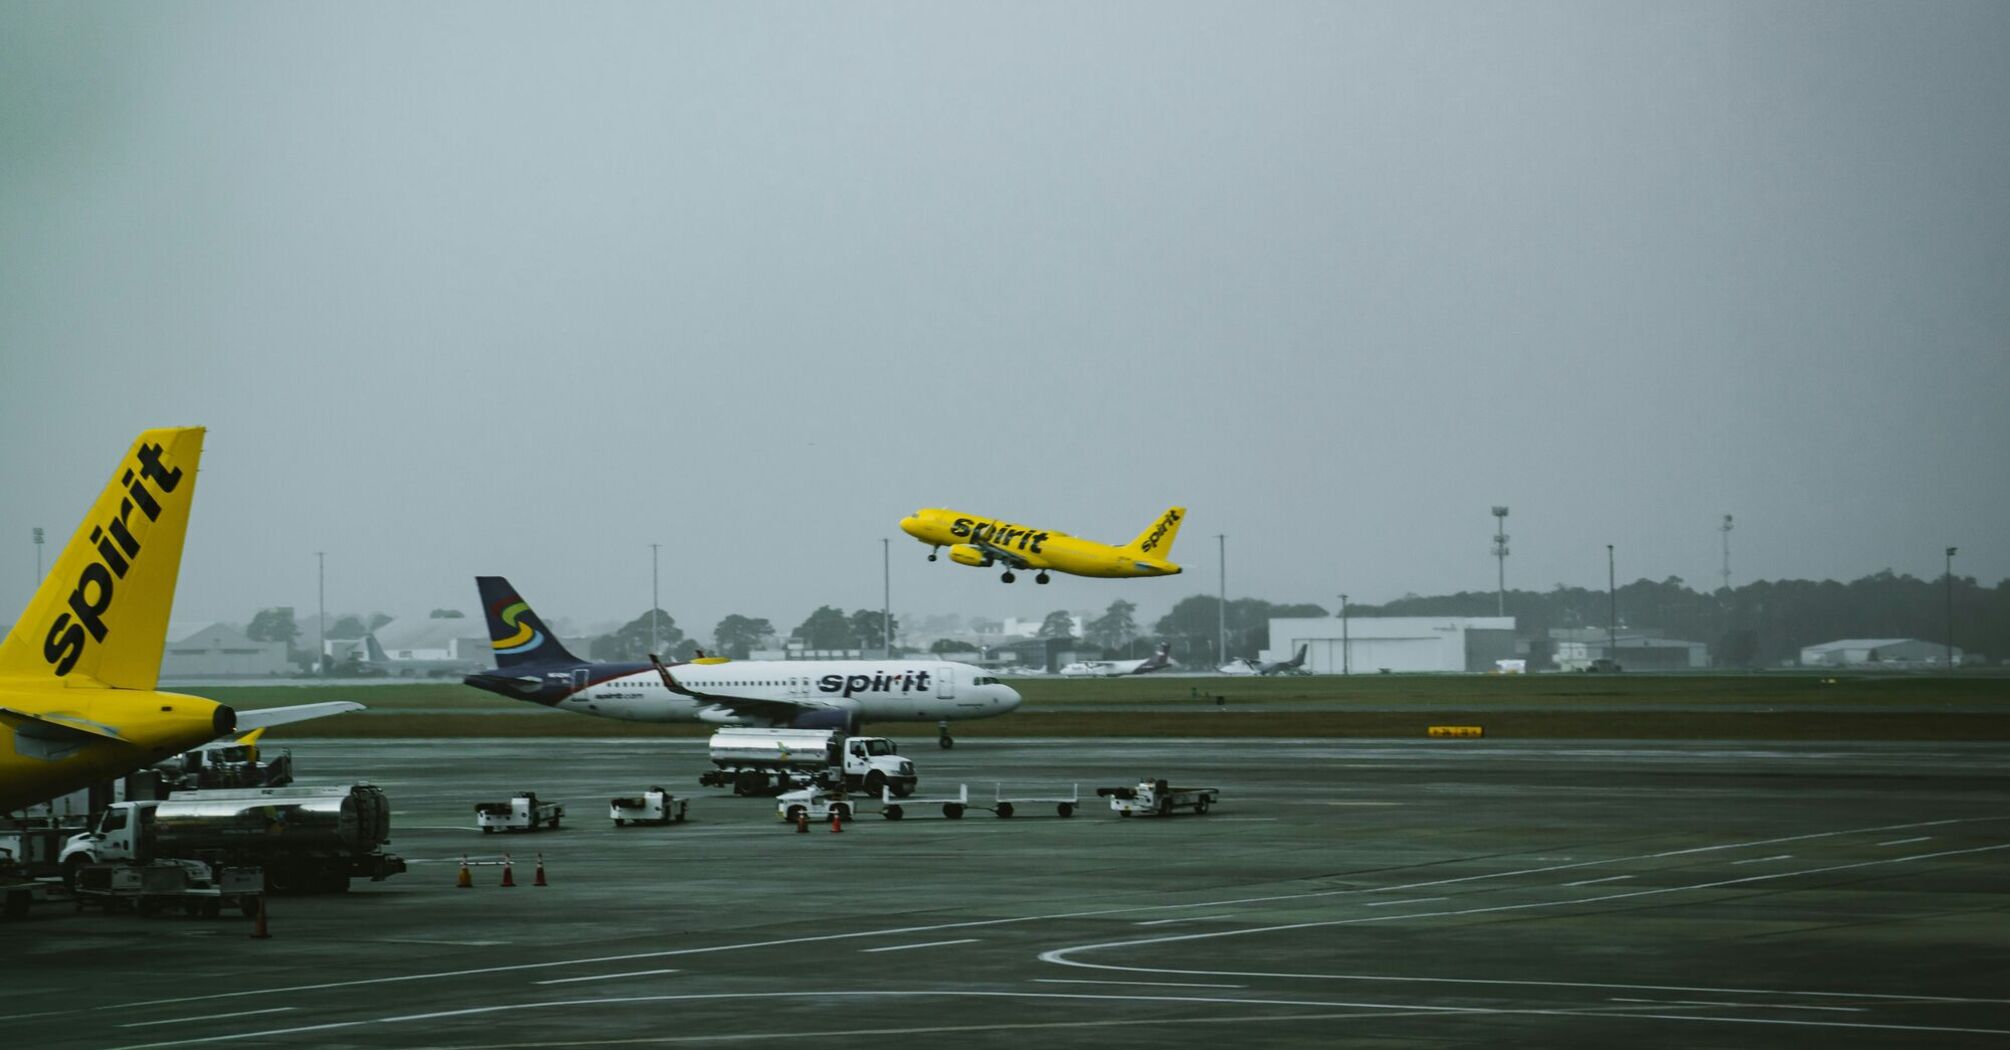 A group of airplanes at an airport